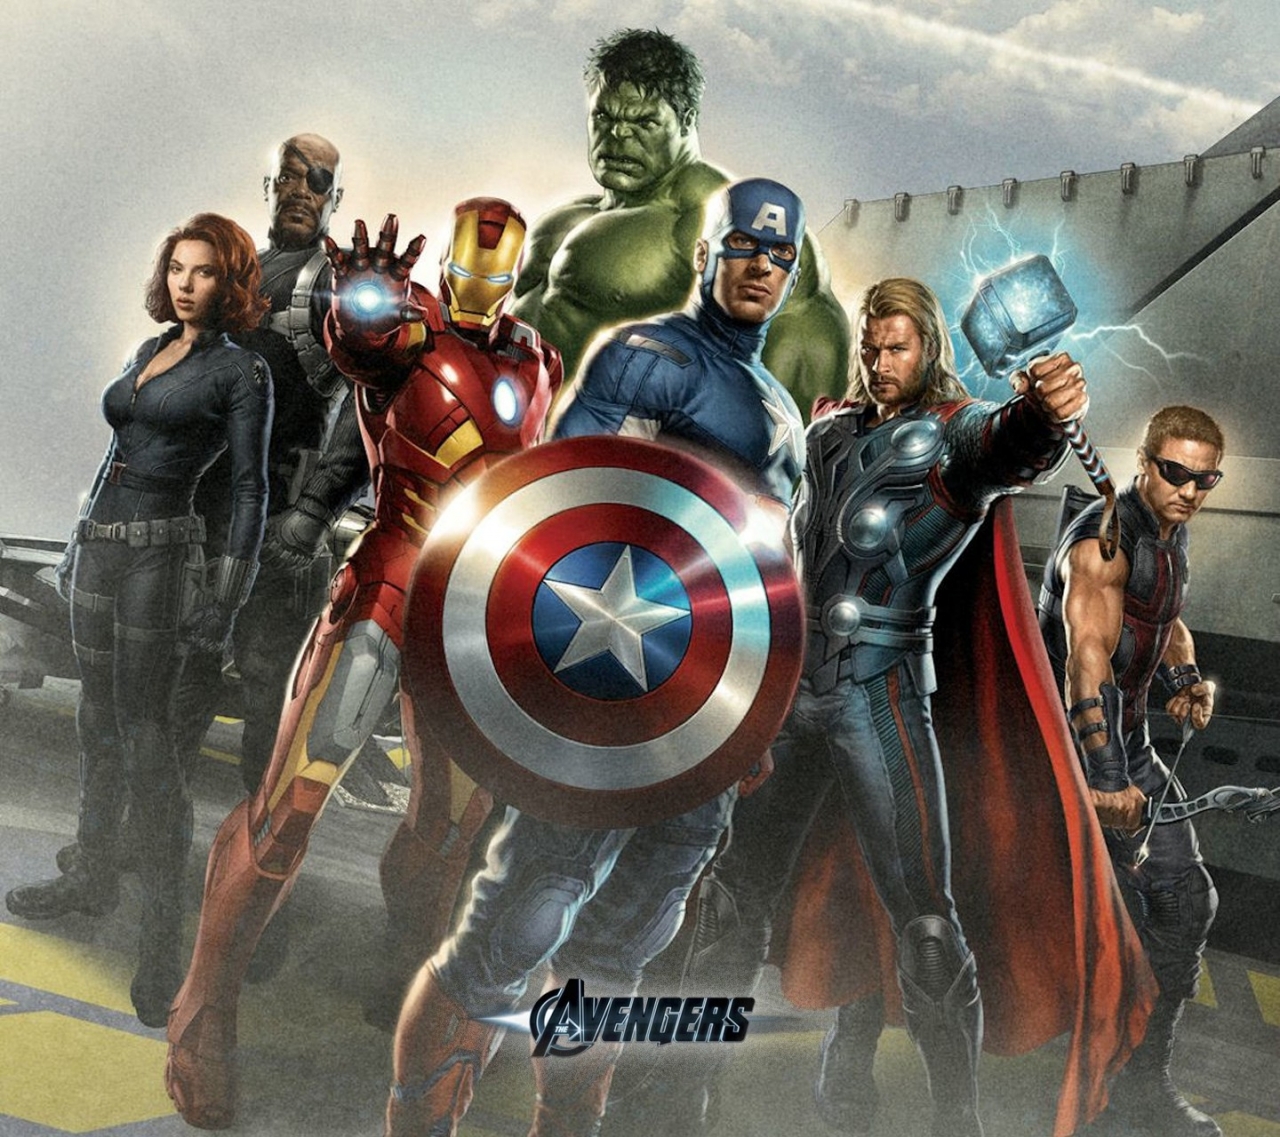 Wallpaper I Made From Promotional Art - Hd Wallpaper Of Avengers For Android - HD Wallpaper 